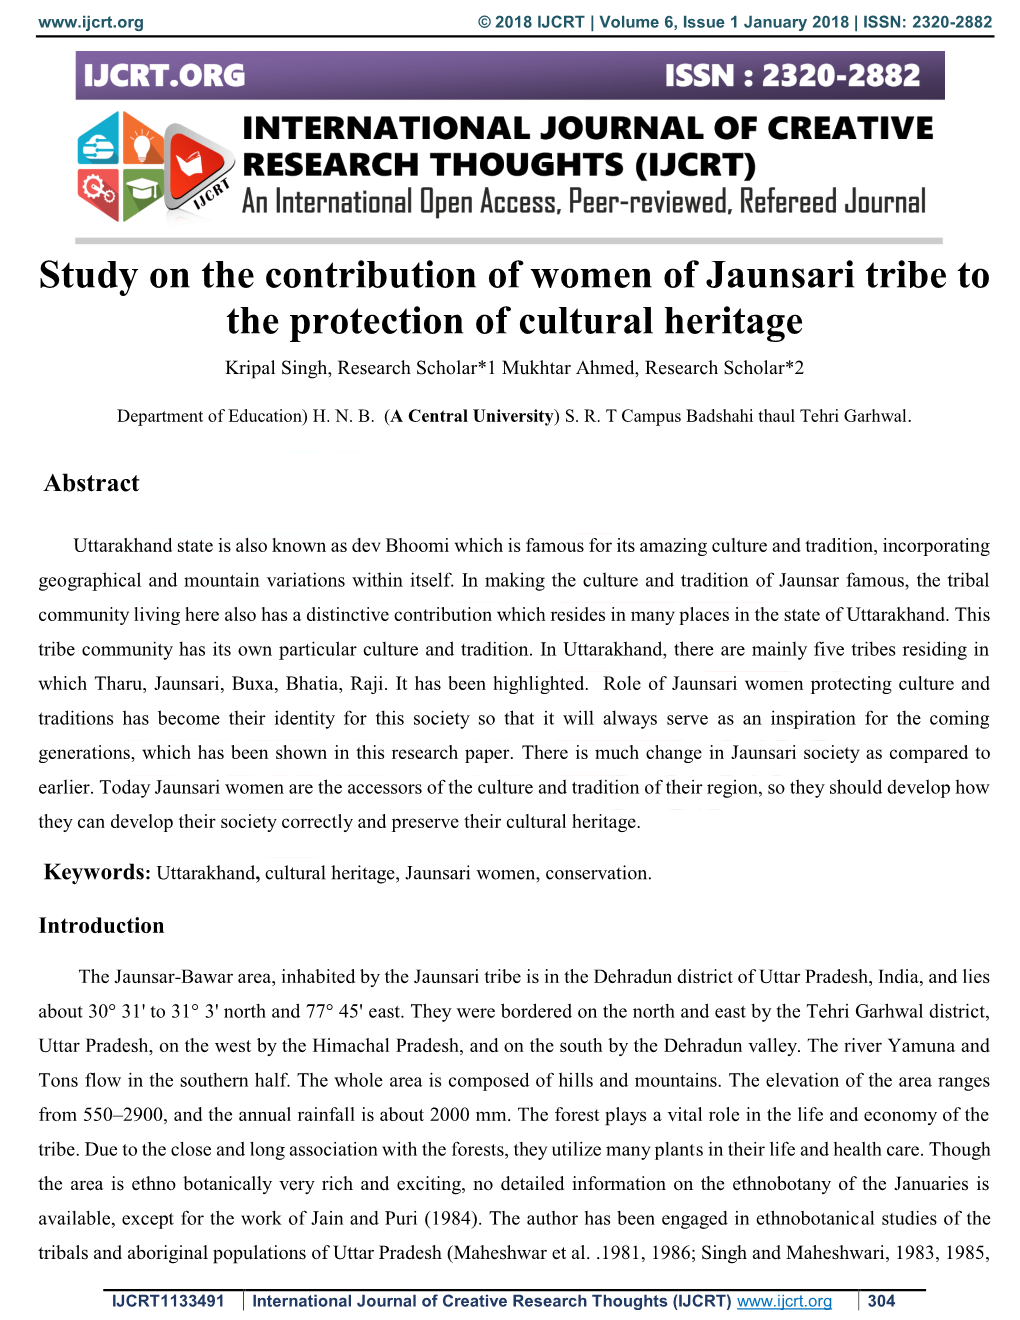 Study on the Contribution of Women of Jaunsari Tribe to the Protection of Cultural Heritage Kripal Singh, Research Scholar*1 Mukhtar Ahmed, Research Scholar*2